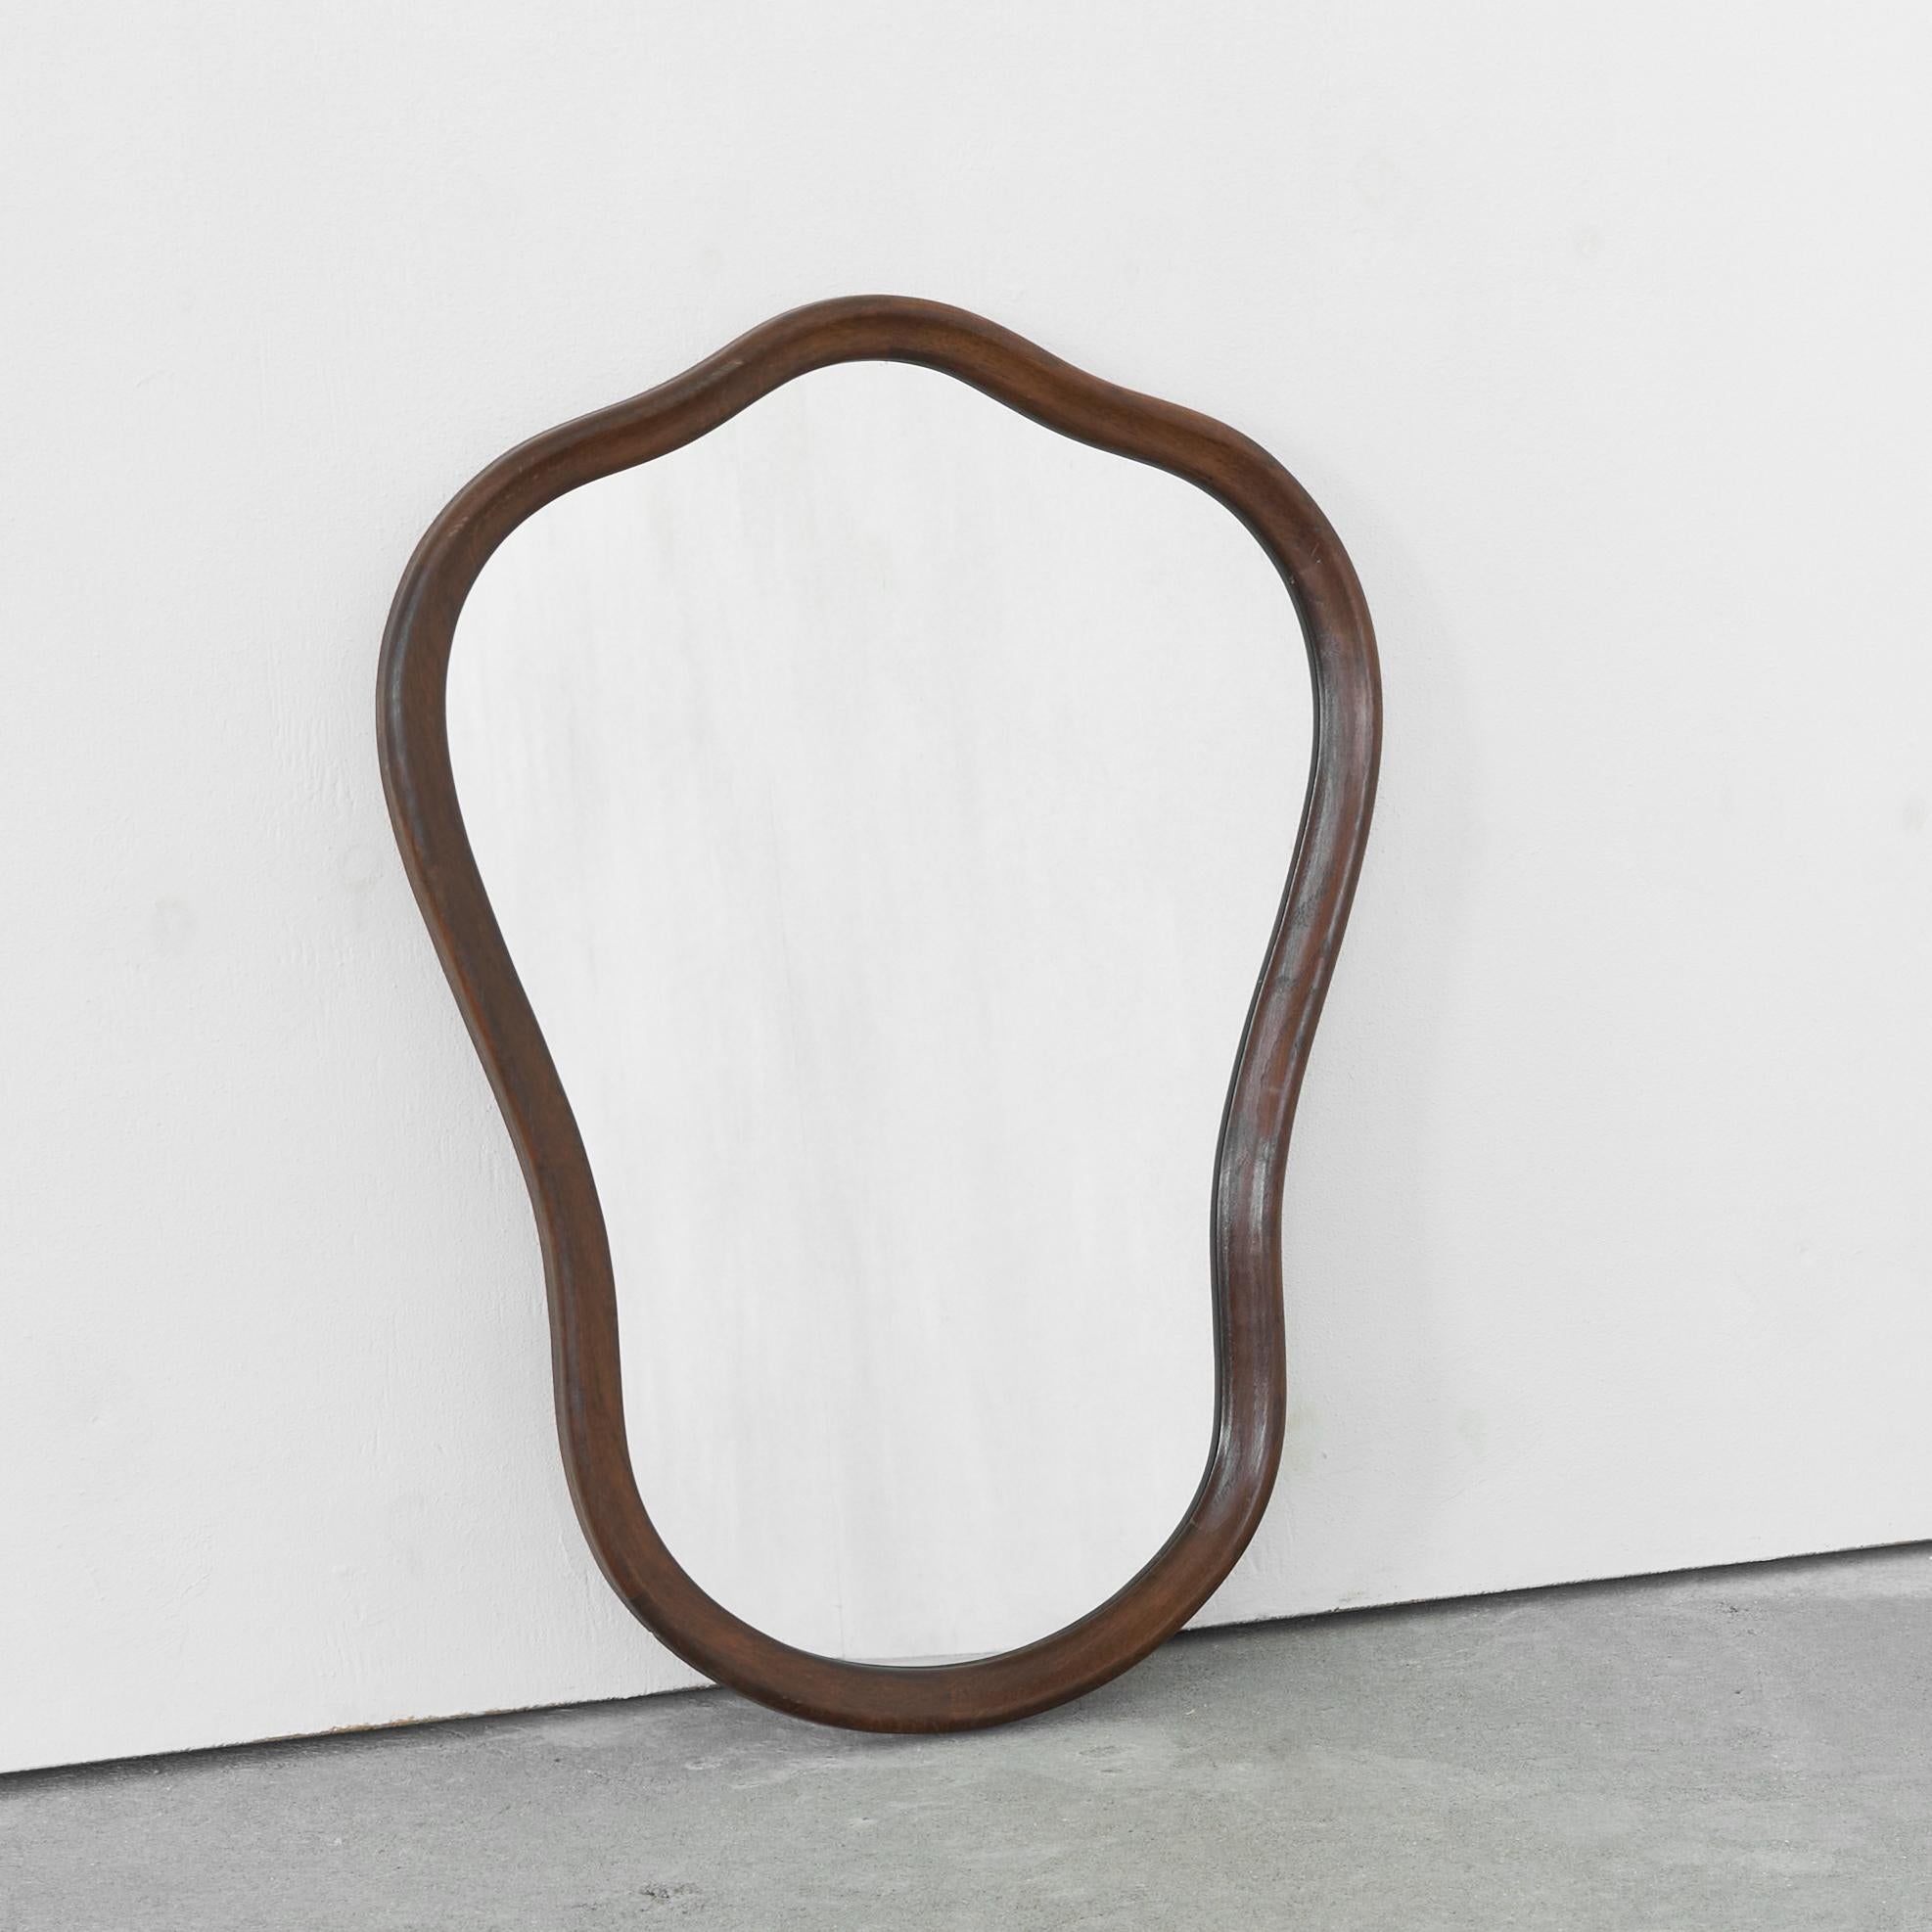 Hand-Crafted Art Deco Sculptural Mirror in Wood, 1930s For Sale